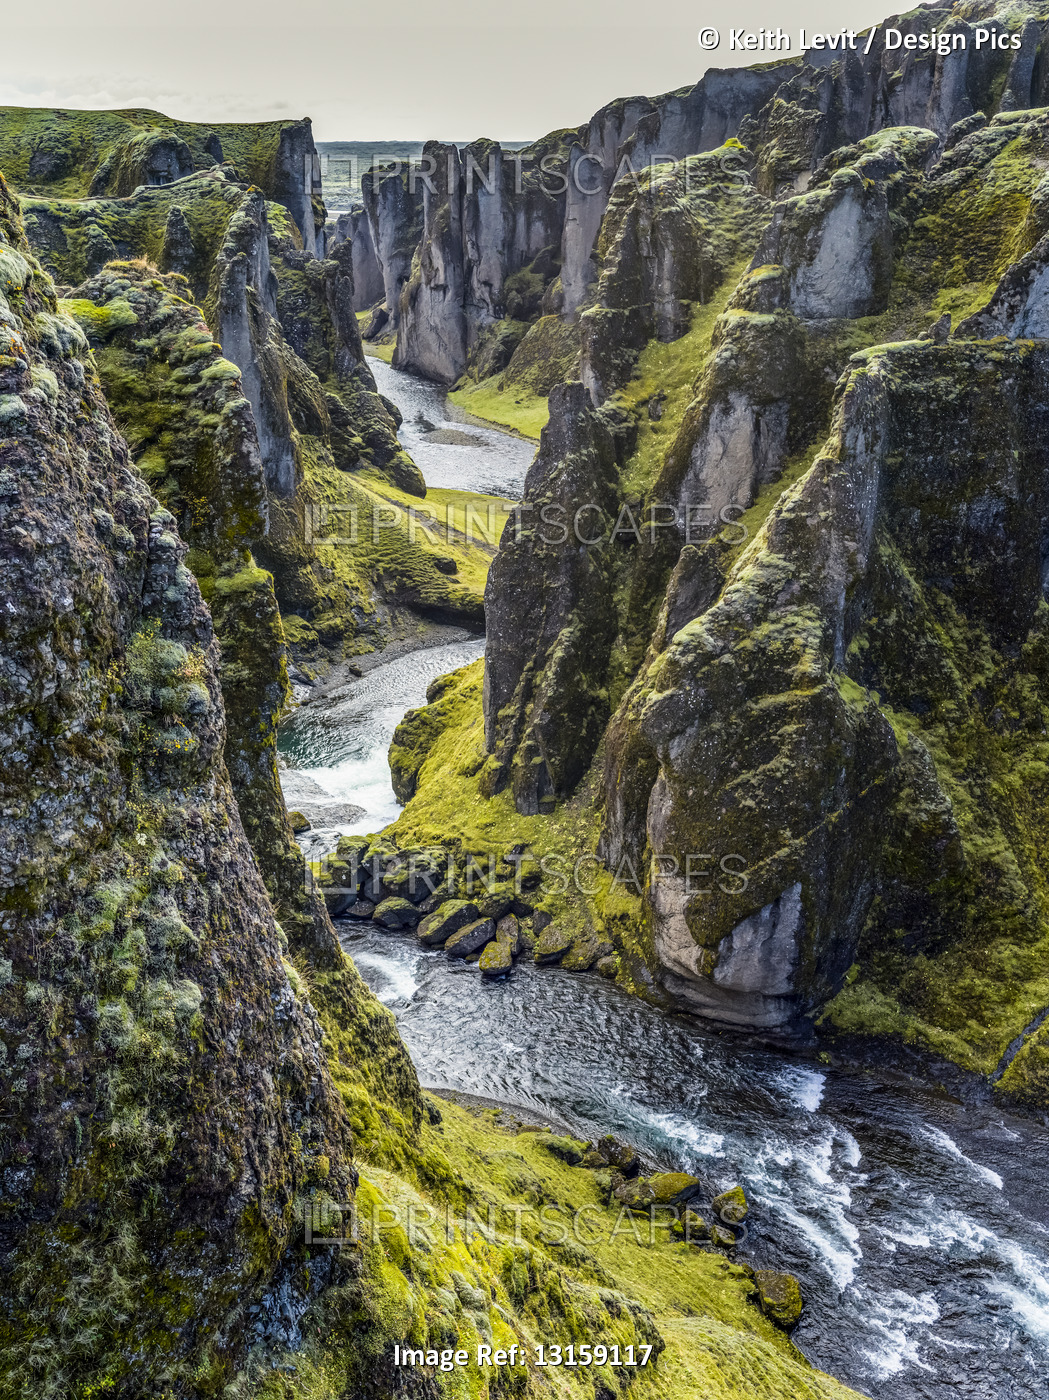 Fjadrargljufur is a magnificent and massive canyon, about 100 meters deep and ...